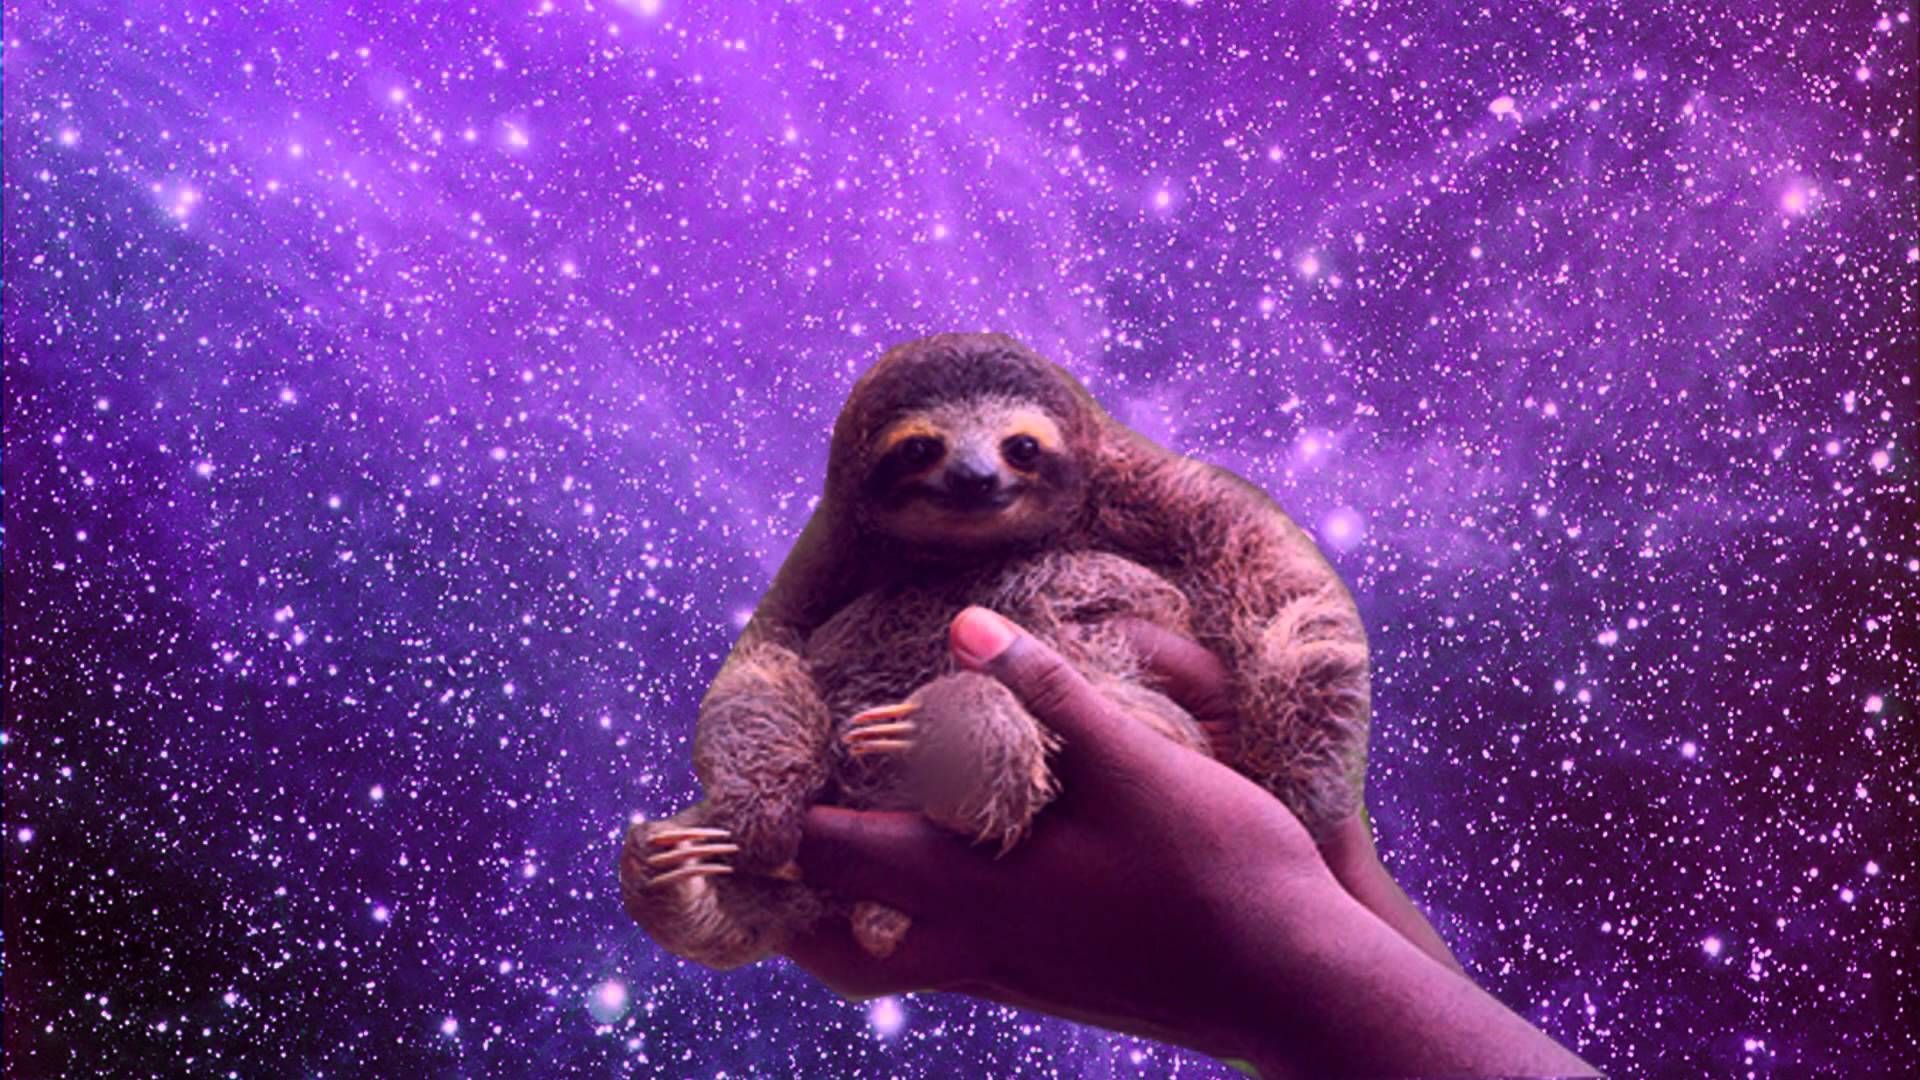 sloths in space photo, HD phone wallpaper, Sloth